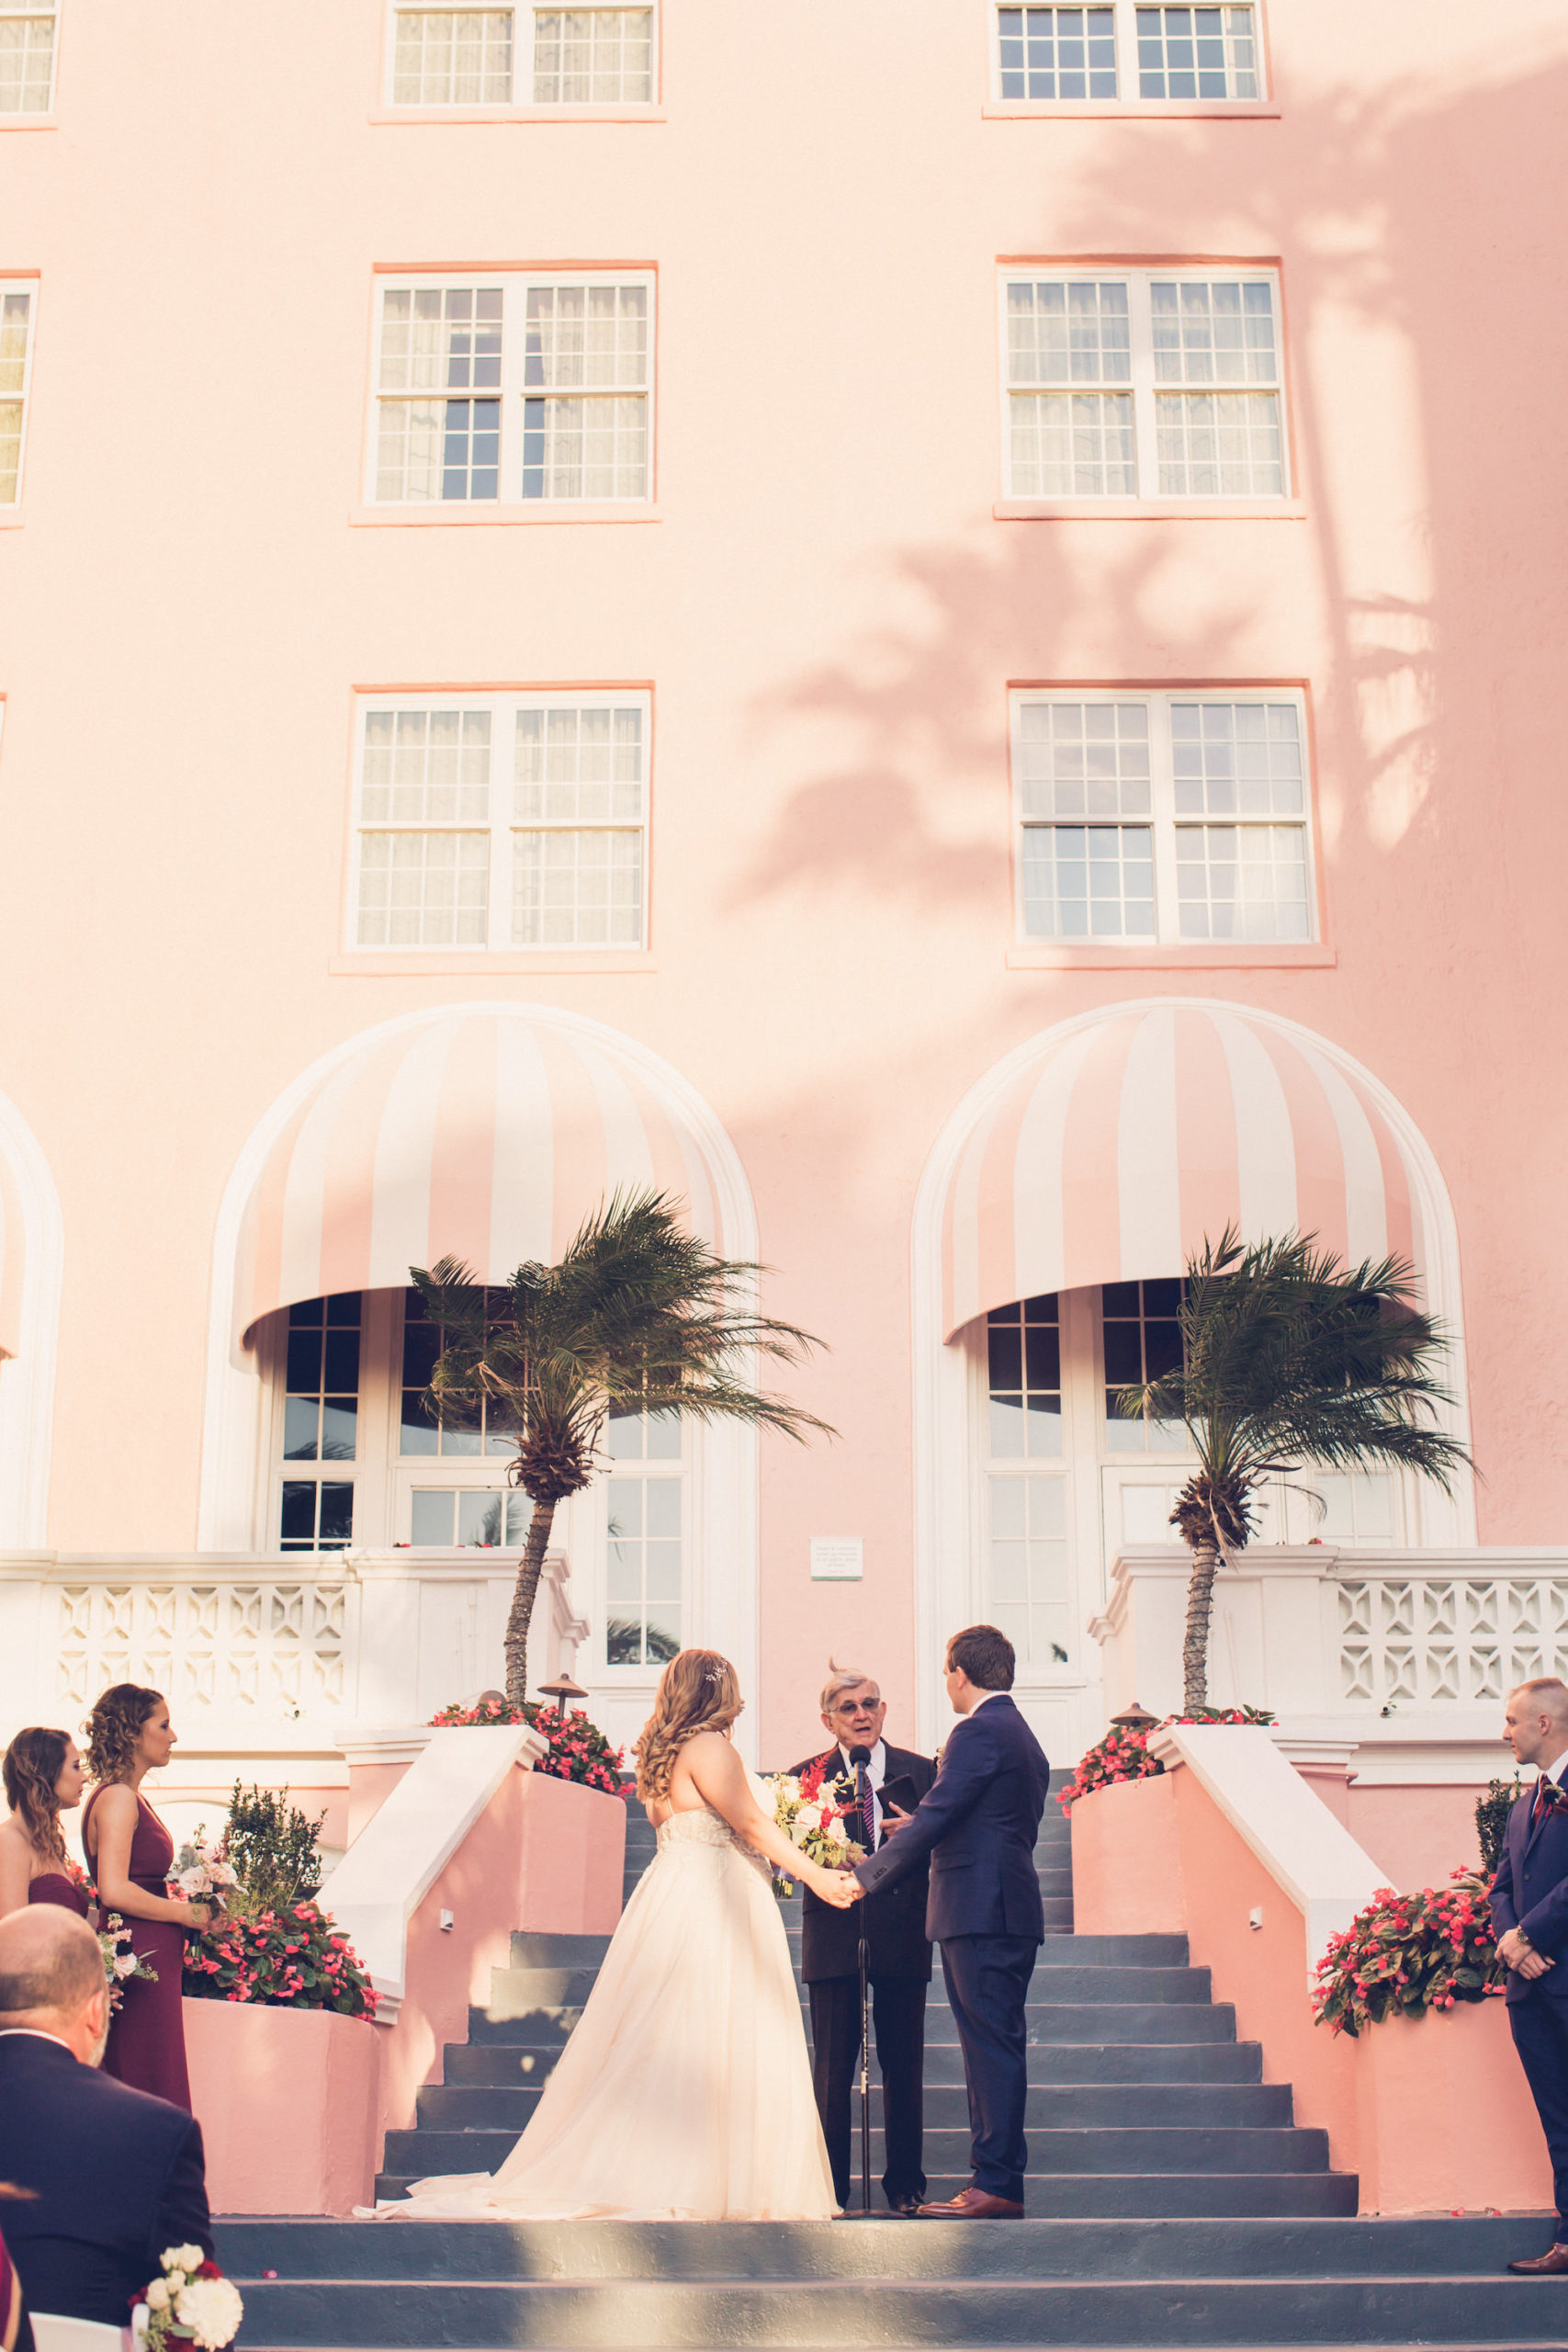 Tampa Bay Bride and Groom Exchanging Wedding Vows Ceremony Portrait at Historic St. Pete Pink Palace Courtyard Stairs The Don CeSar | Wedding Photographer Luxe Light Images